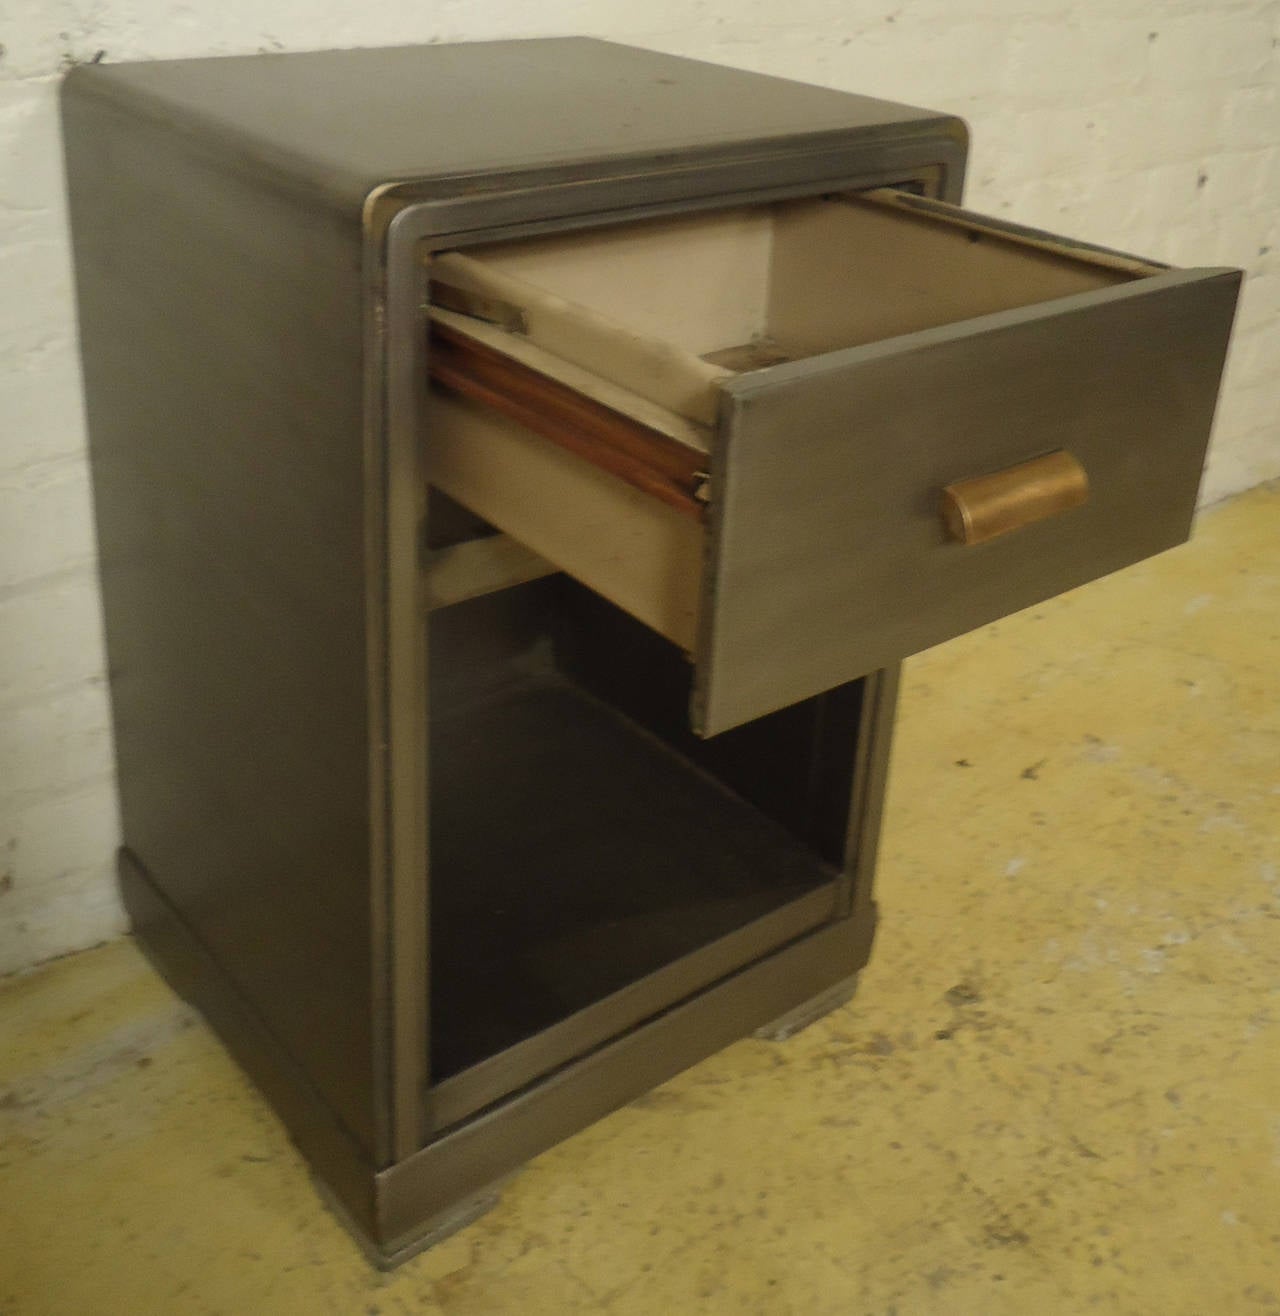 Vintage-modern 1960's Simmons nightstand featuring one drawer with sculpted brass handle and lower storage compartment.

(Please confirm item location - NY or NJ - with dealer)